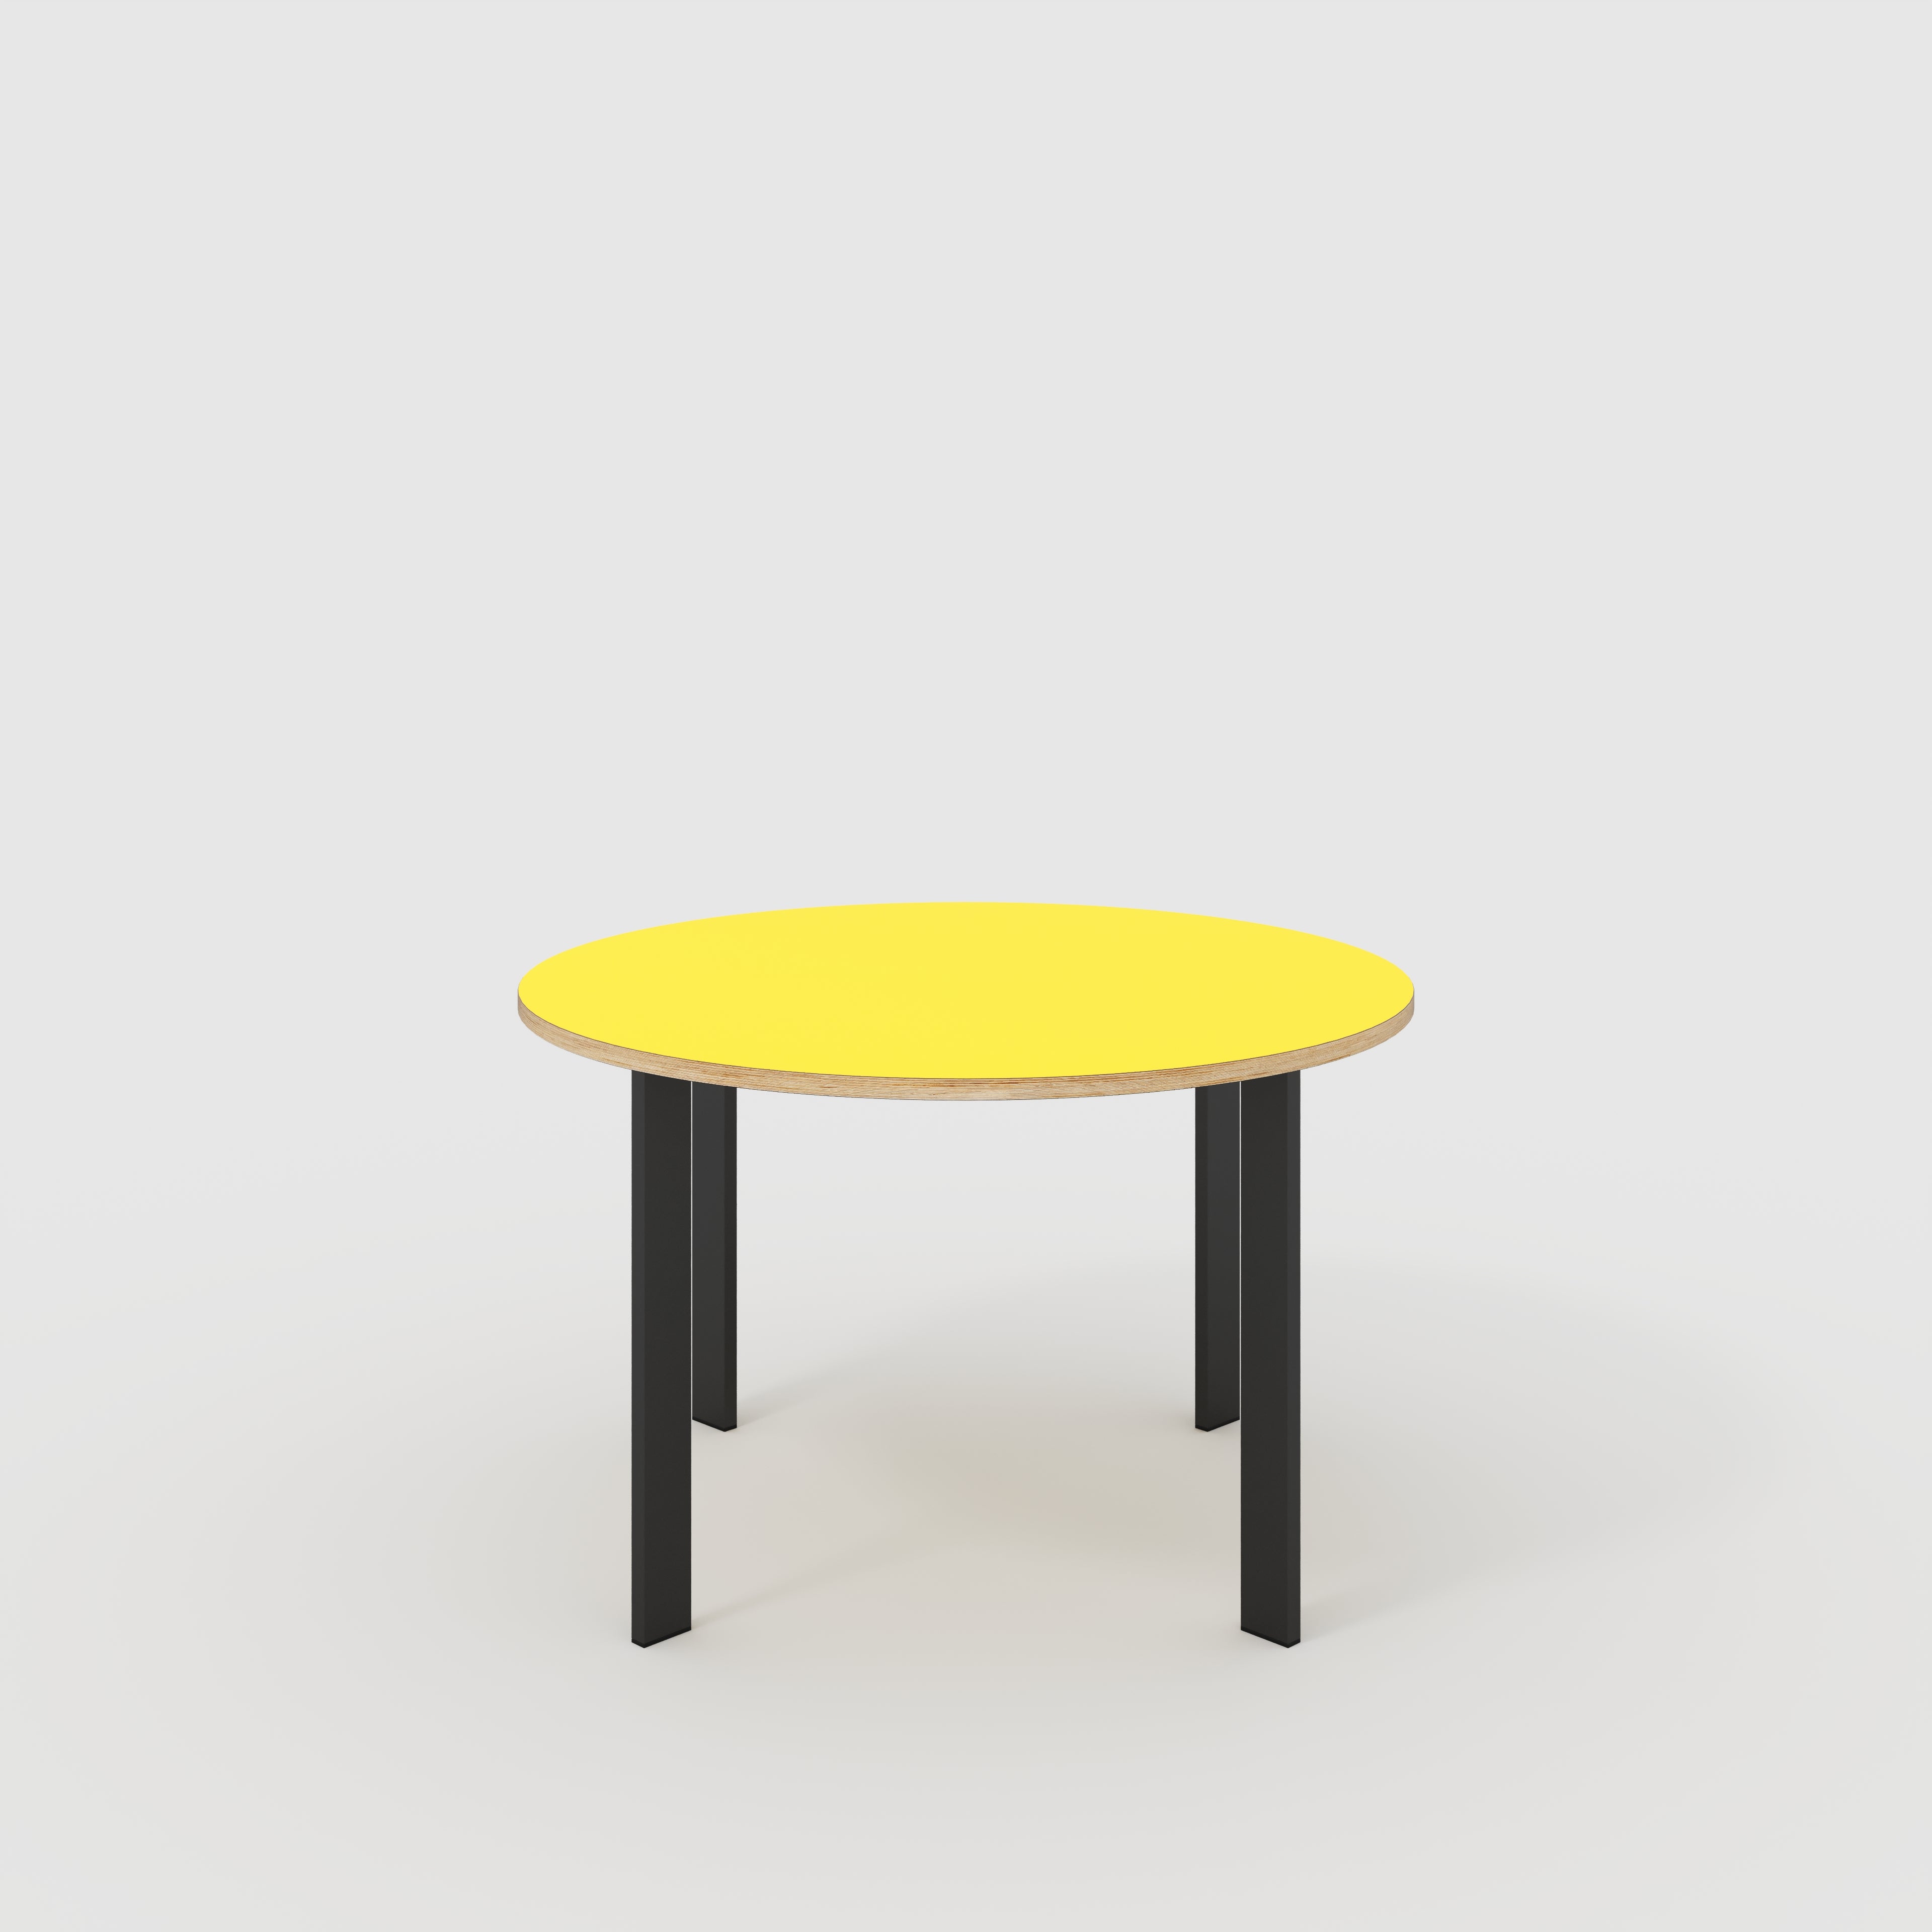 Round Table with Black Rectangular Single Pin Legs - Formica Chrome Yellow - 1200(dia) x 735(h)